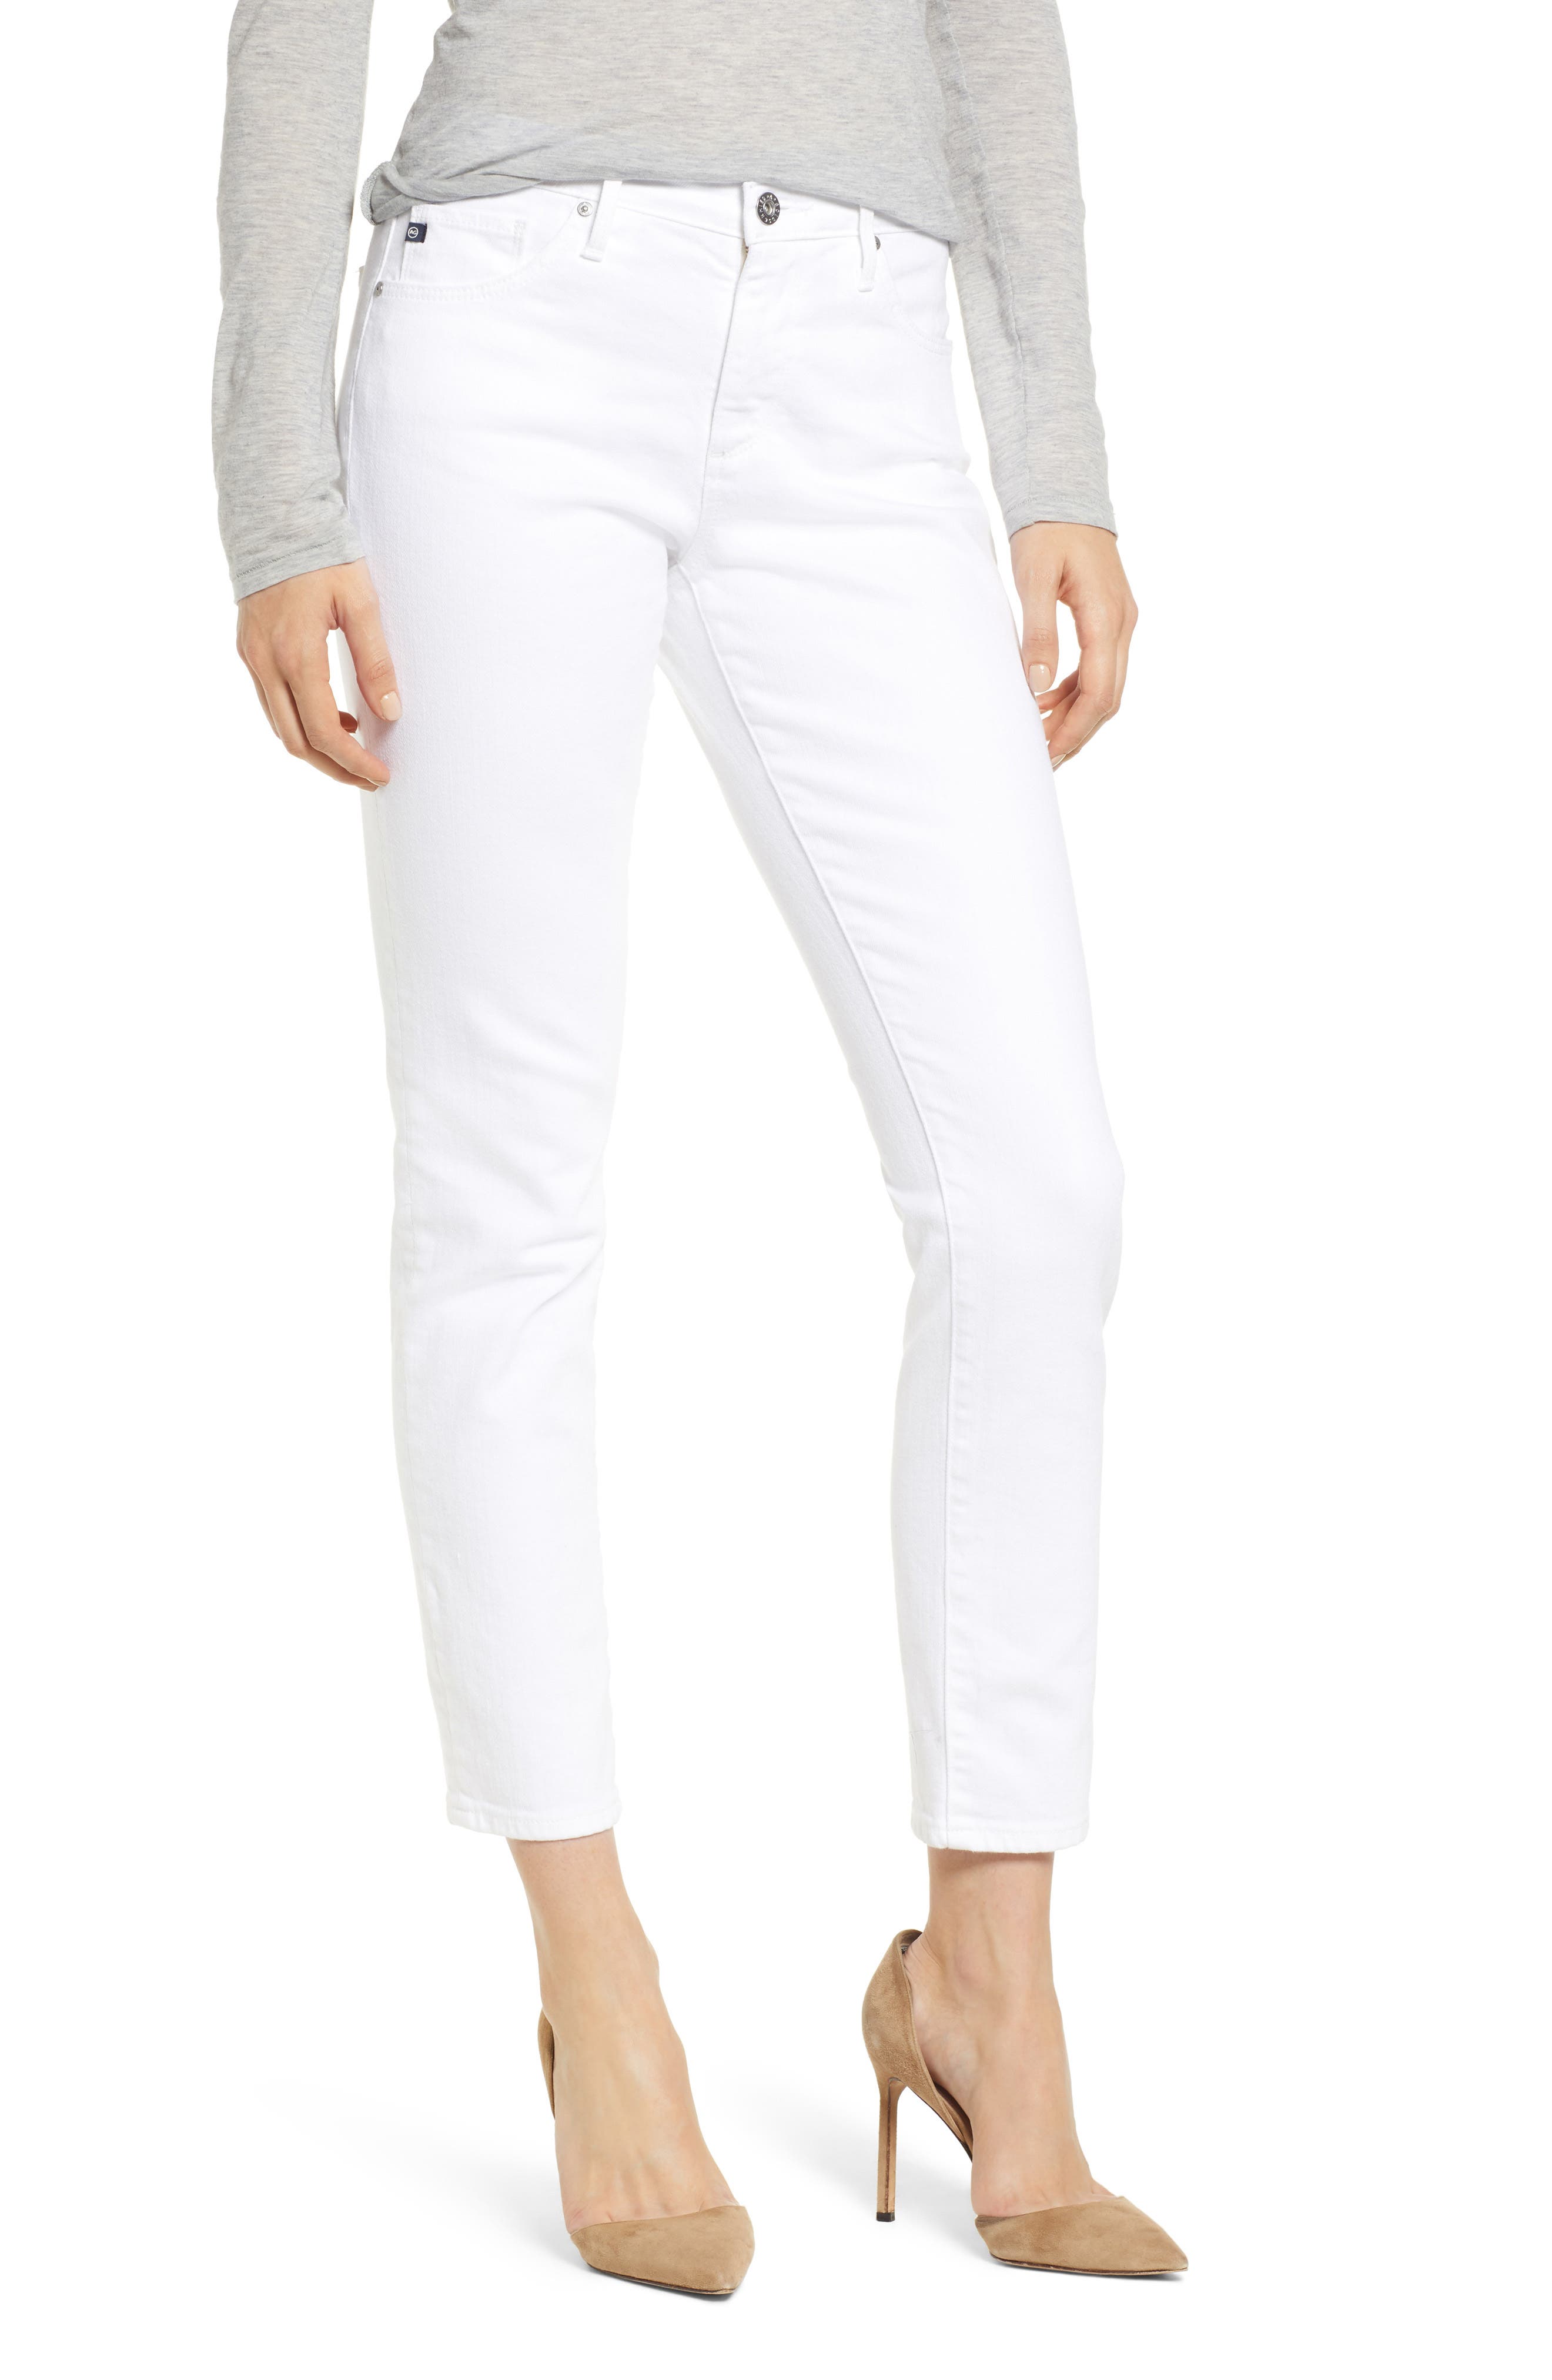 high waisted white washed jeans